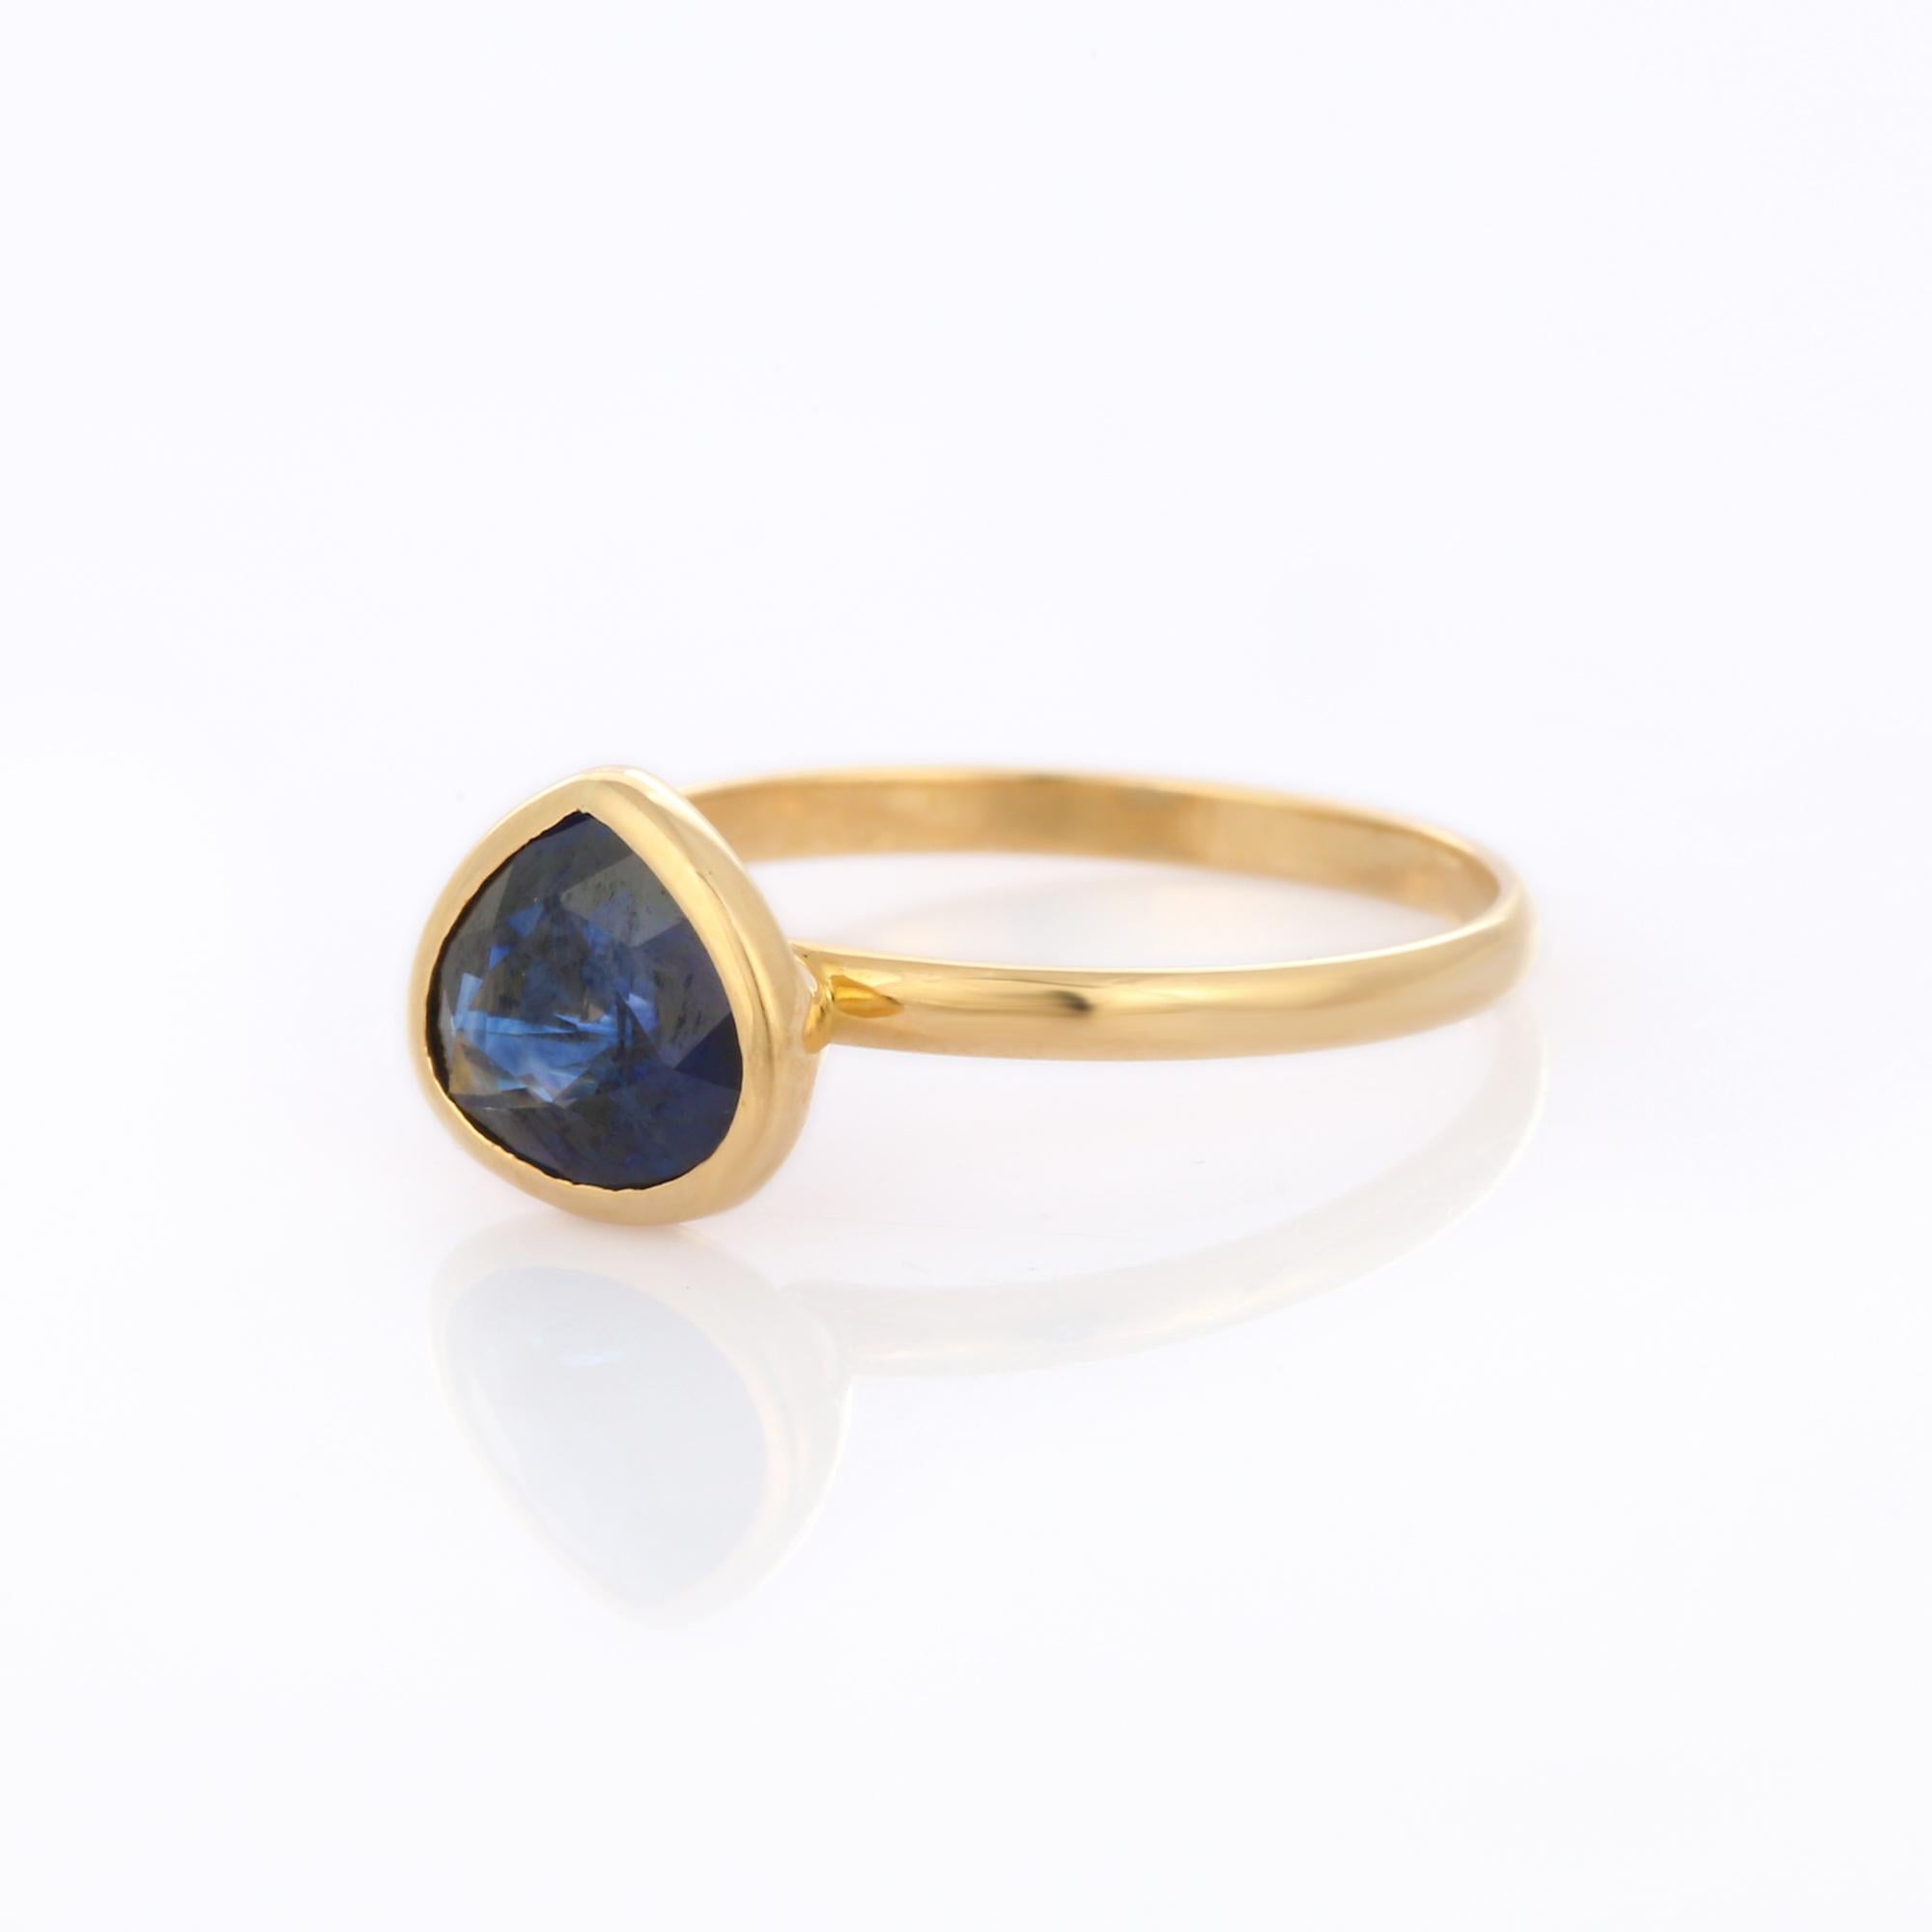 For Sale:  1.66 ct Bezel Set Pear Cut Blue Sapphire Gemstone 18K Yellow Gold Solitaire Ring 3